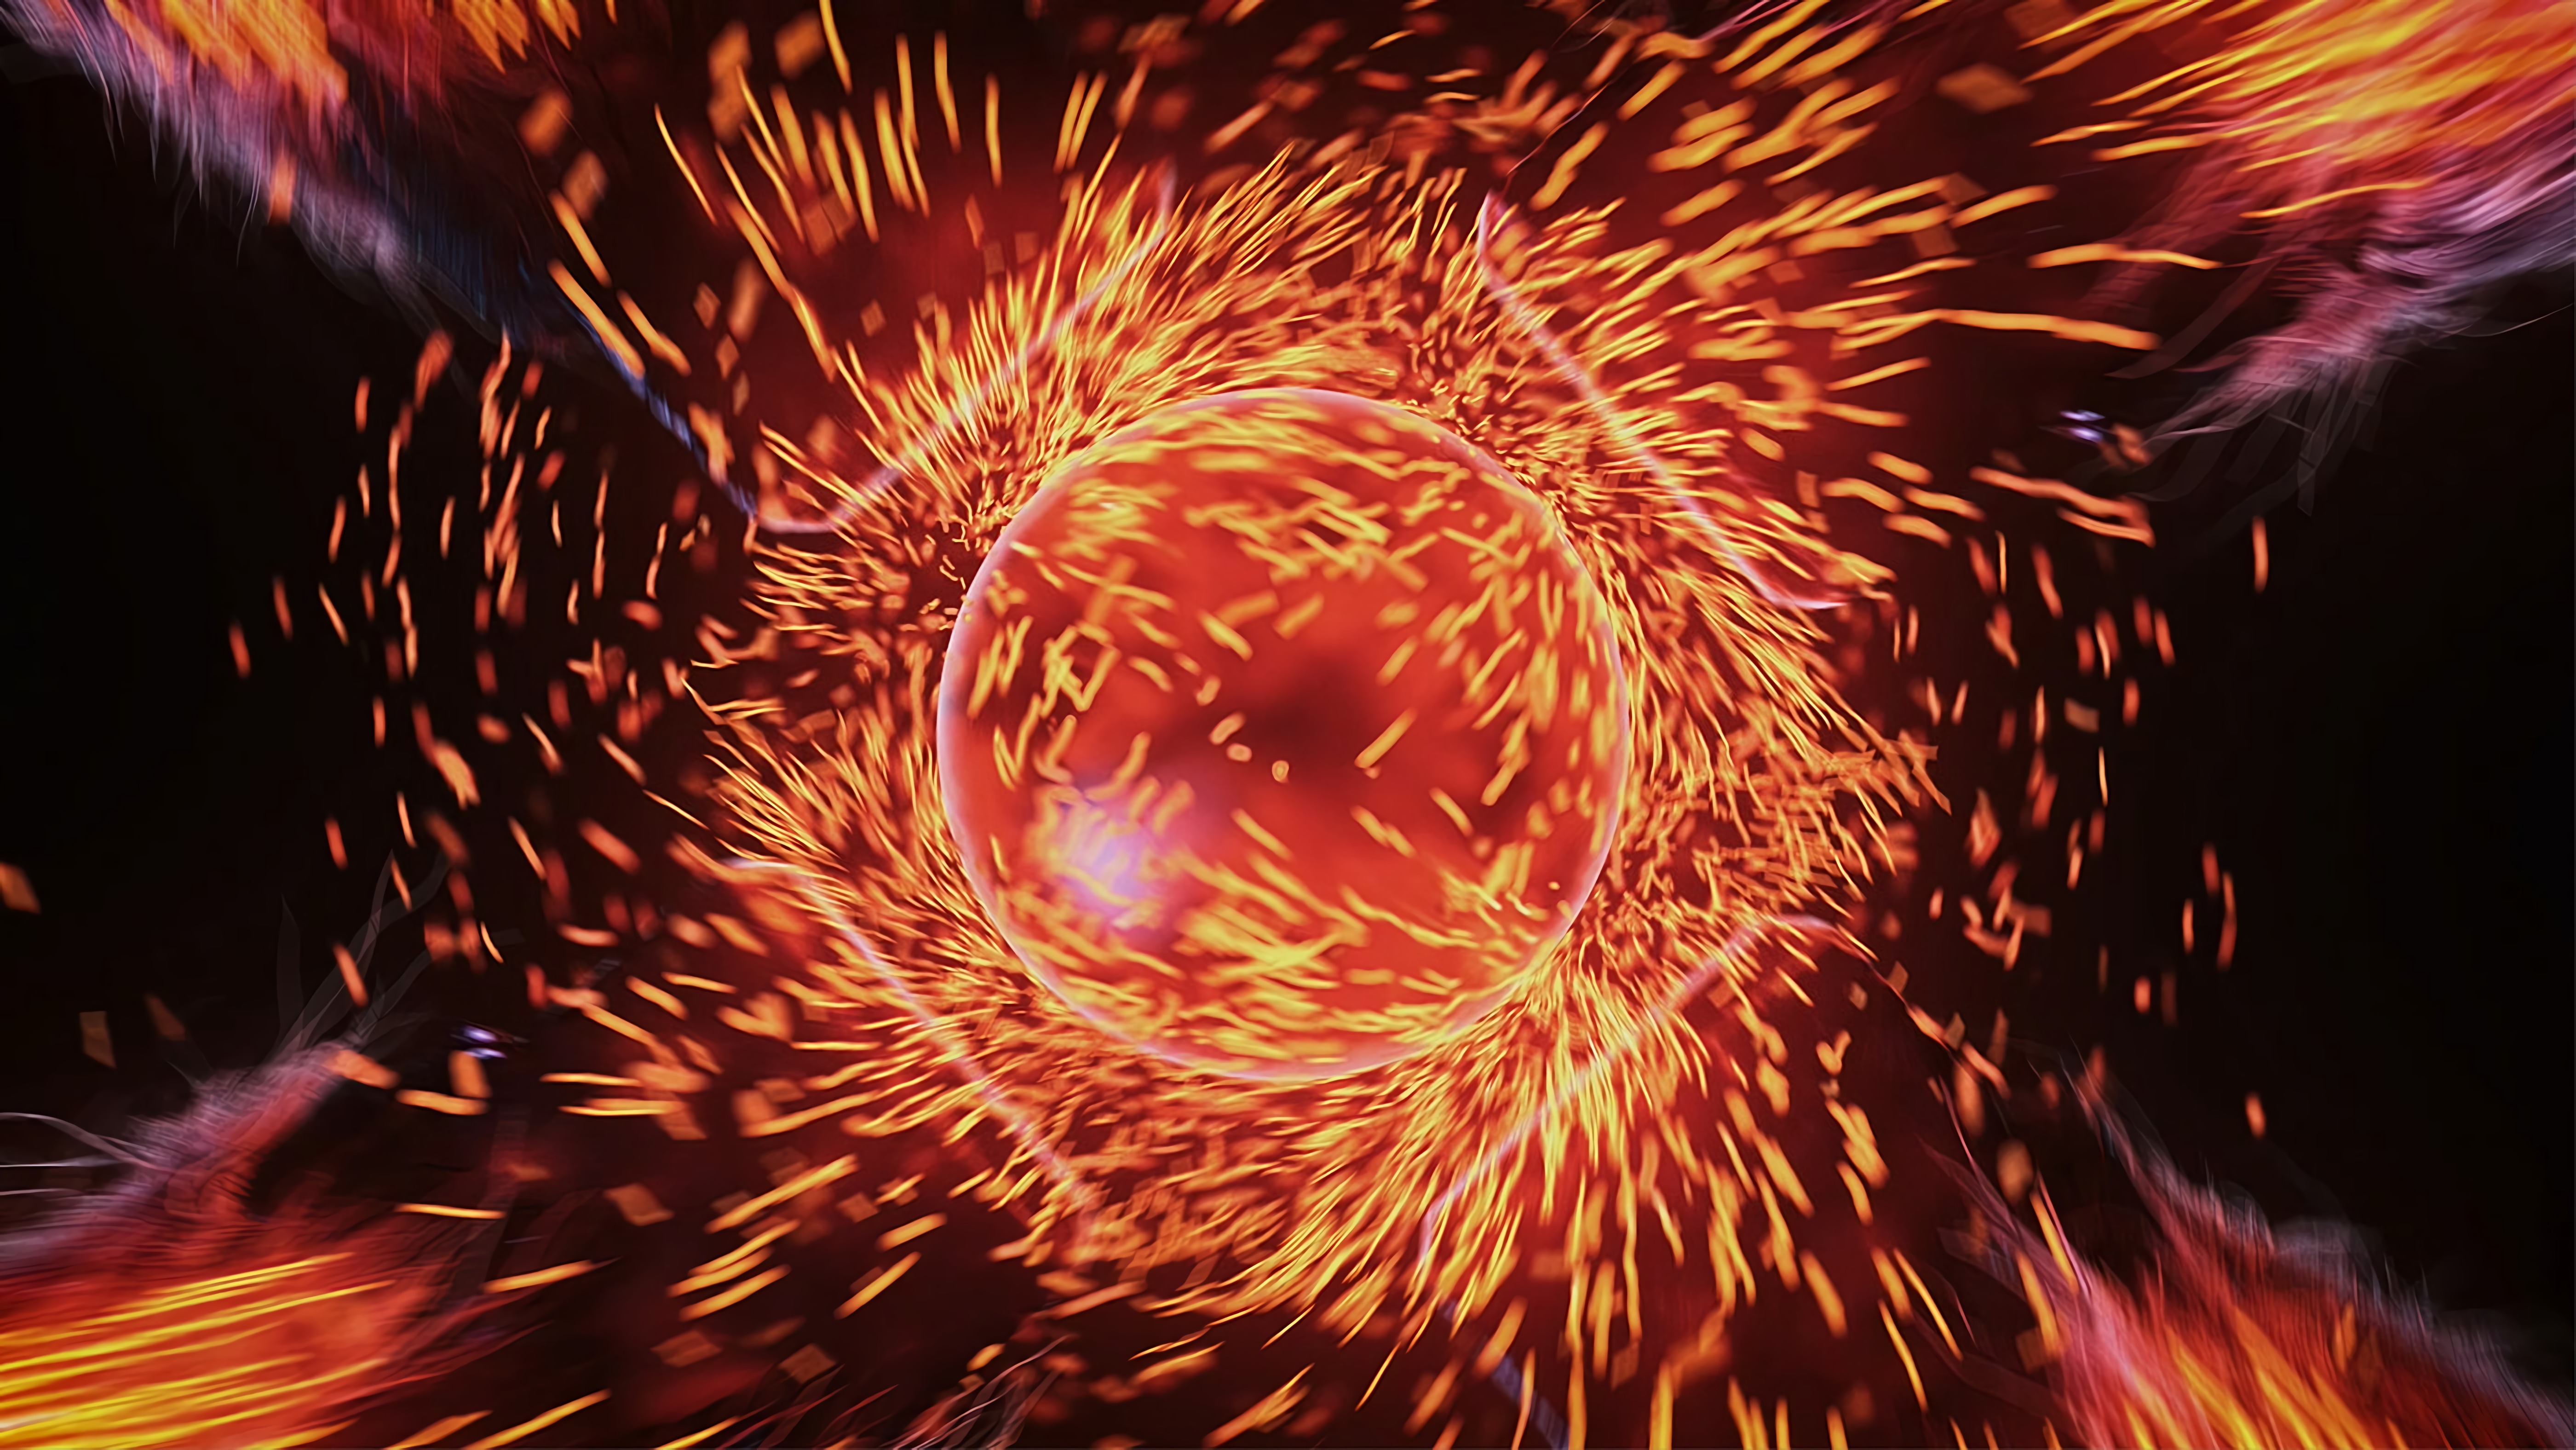 abstract, bright, sparks, ball, flaming, fiery